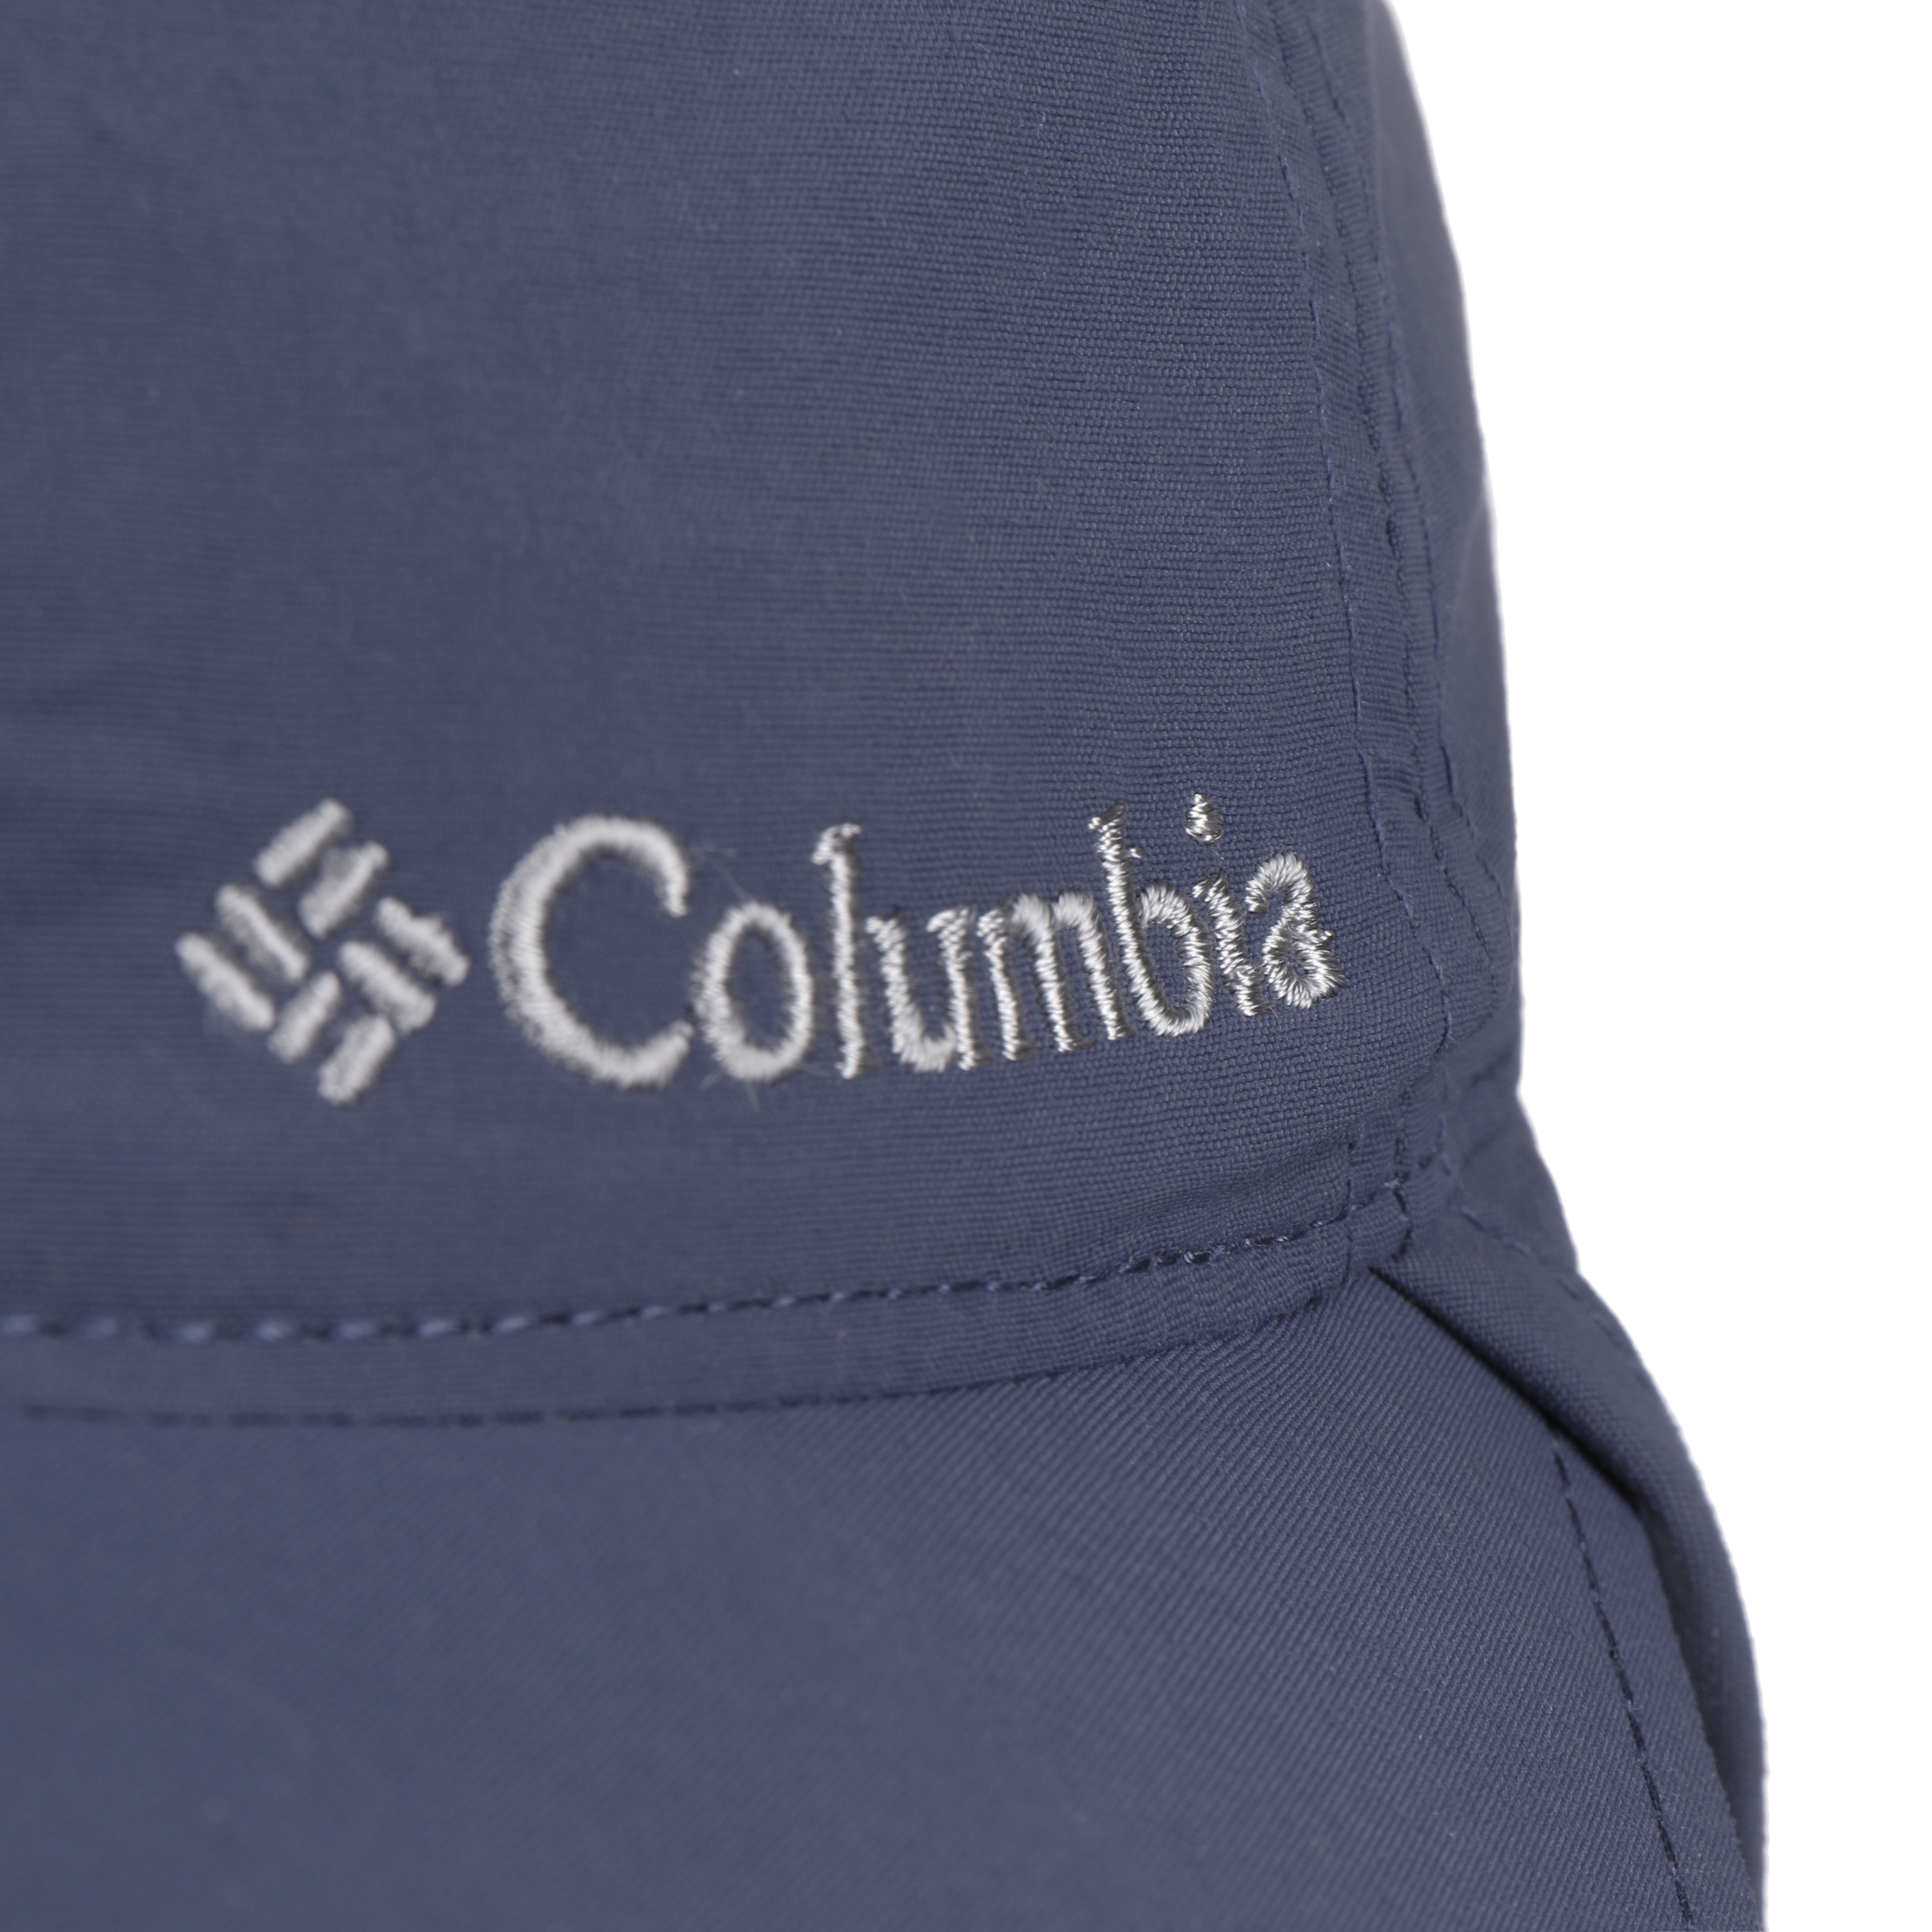 Schooner Cap with Neck Protection by Columbia - 35,95 €